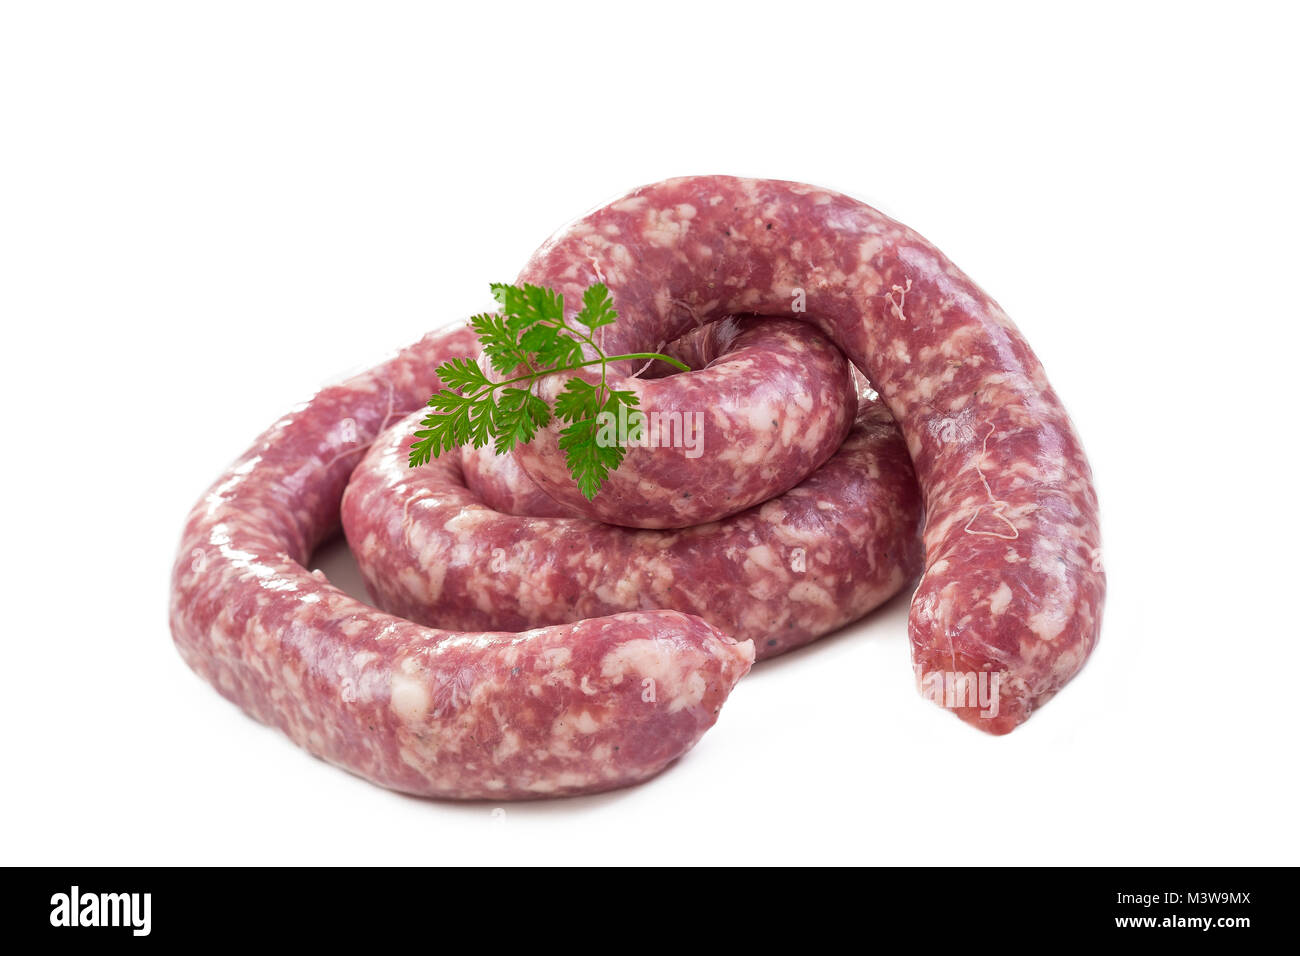 Toulouse sausage Raw 'saucisse de toulouse' - french meat specialty from Toulouse on white Stock Photo